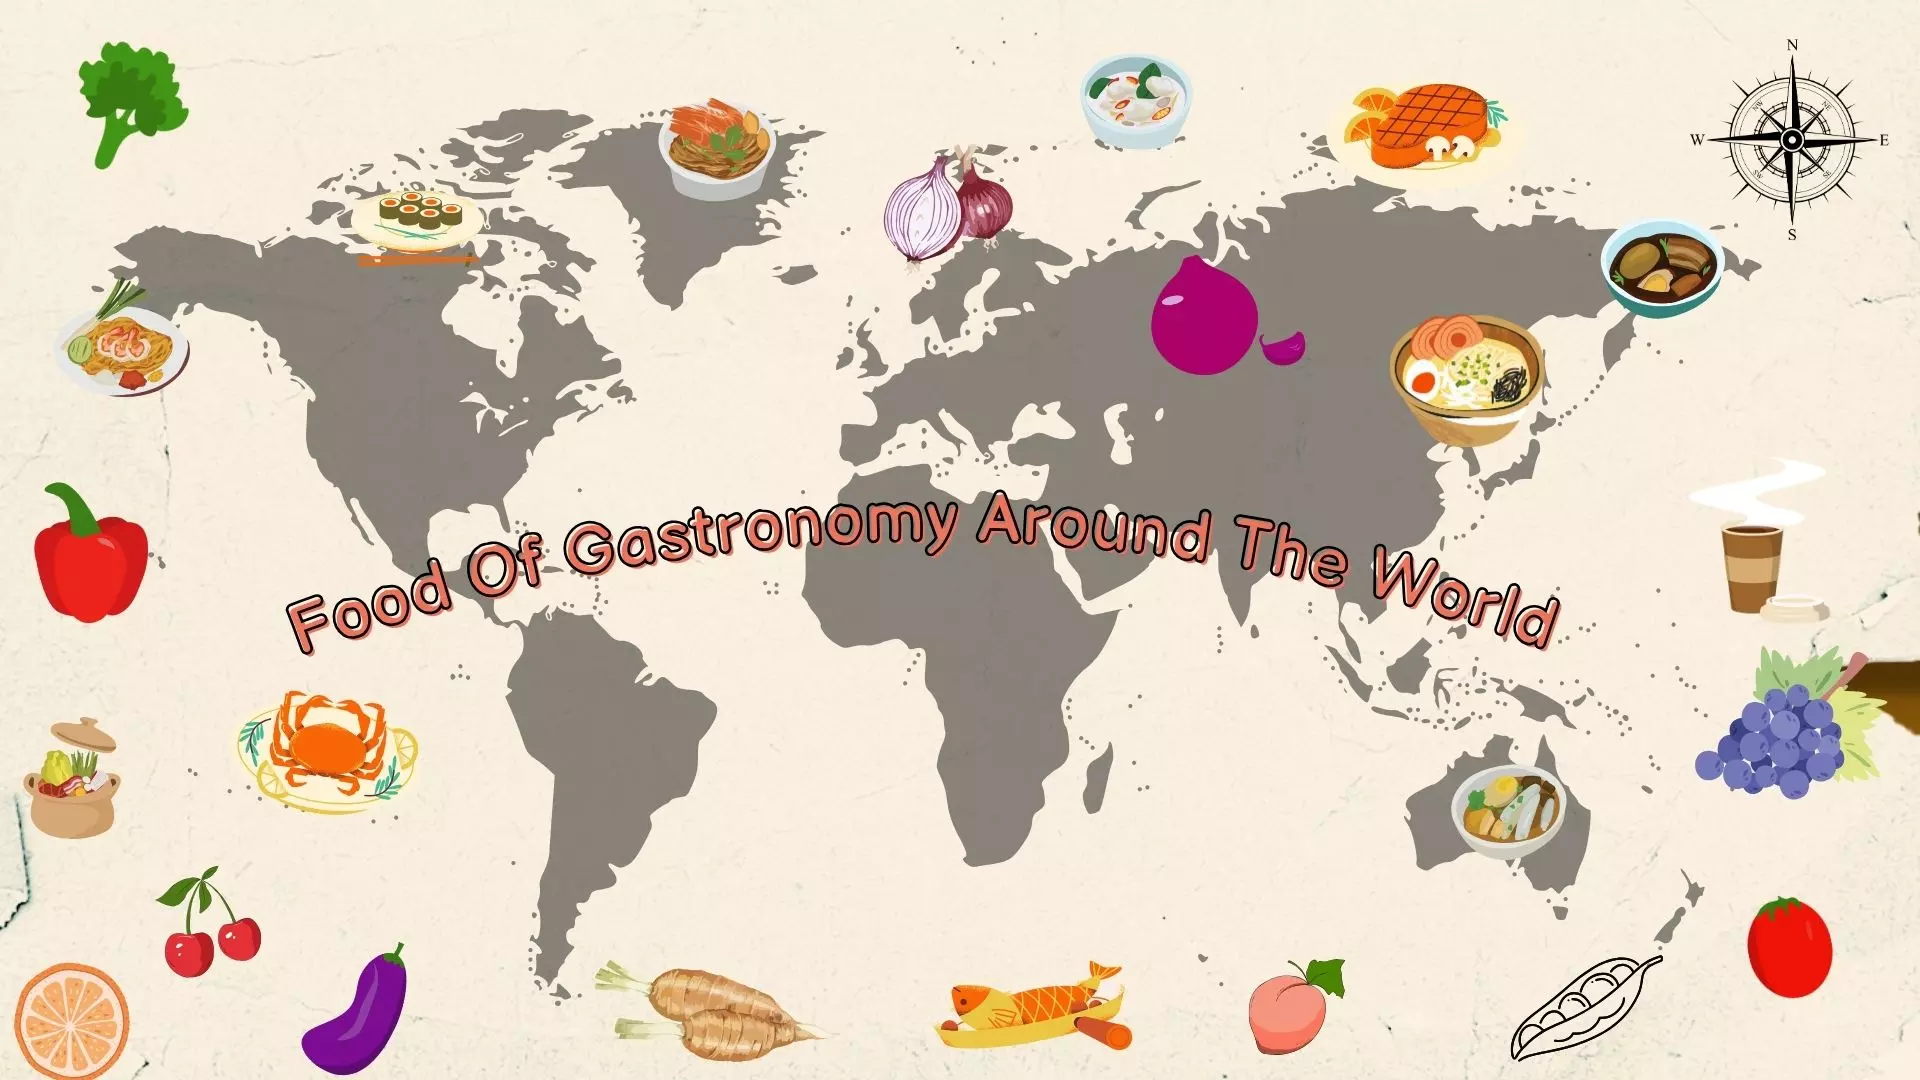 Foodydate Food Of Gastronomy Around The World